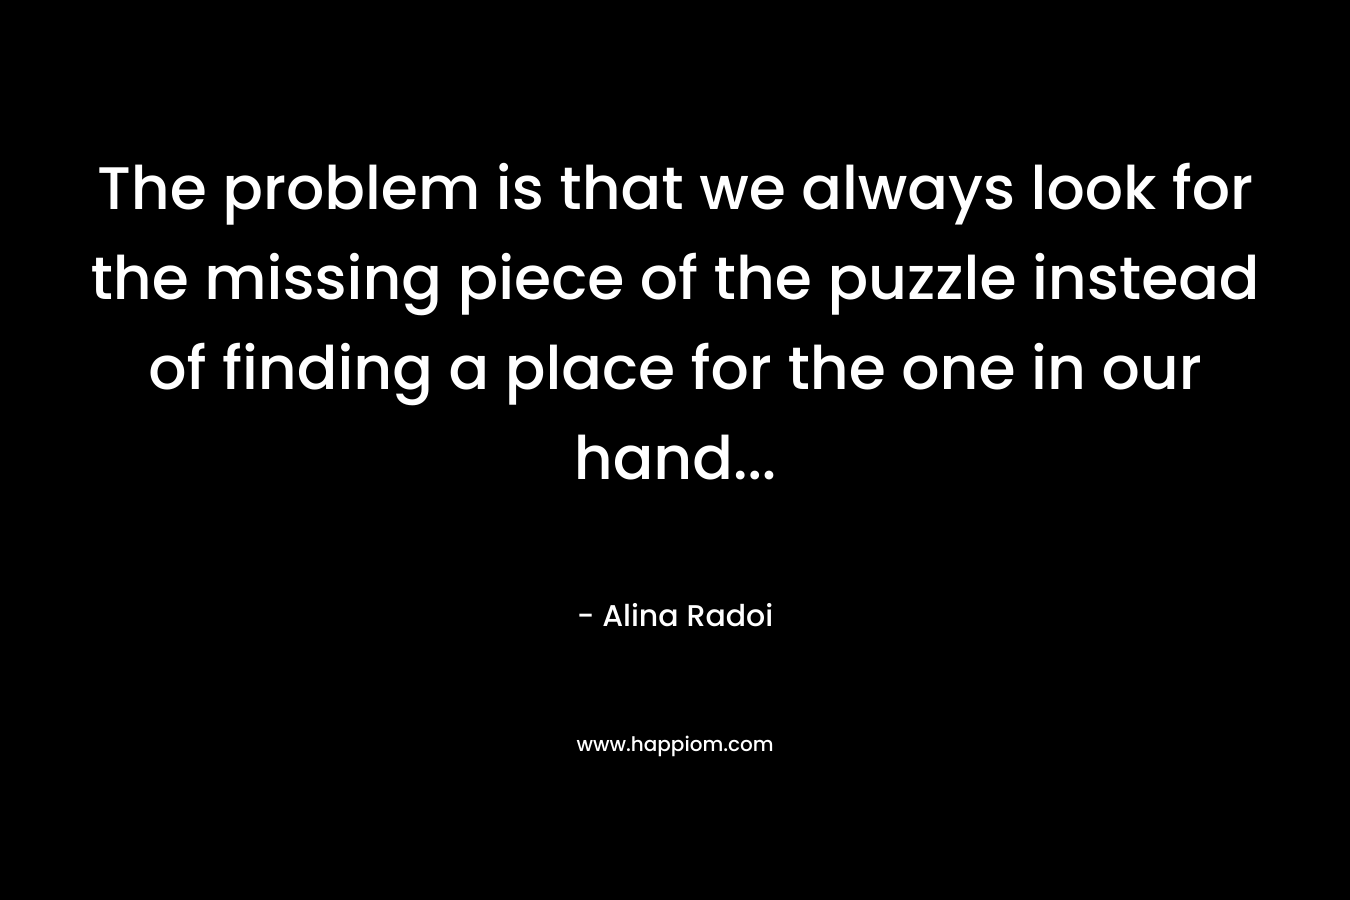 The problem is that we always look for the missing piece of the puzzle instead of finding a place for the one in our hand… – Alina Radoi